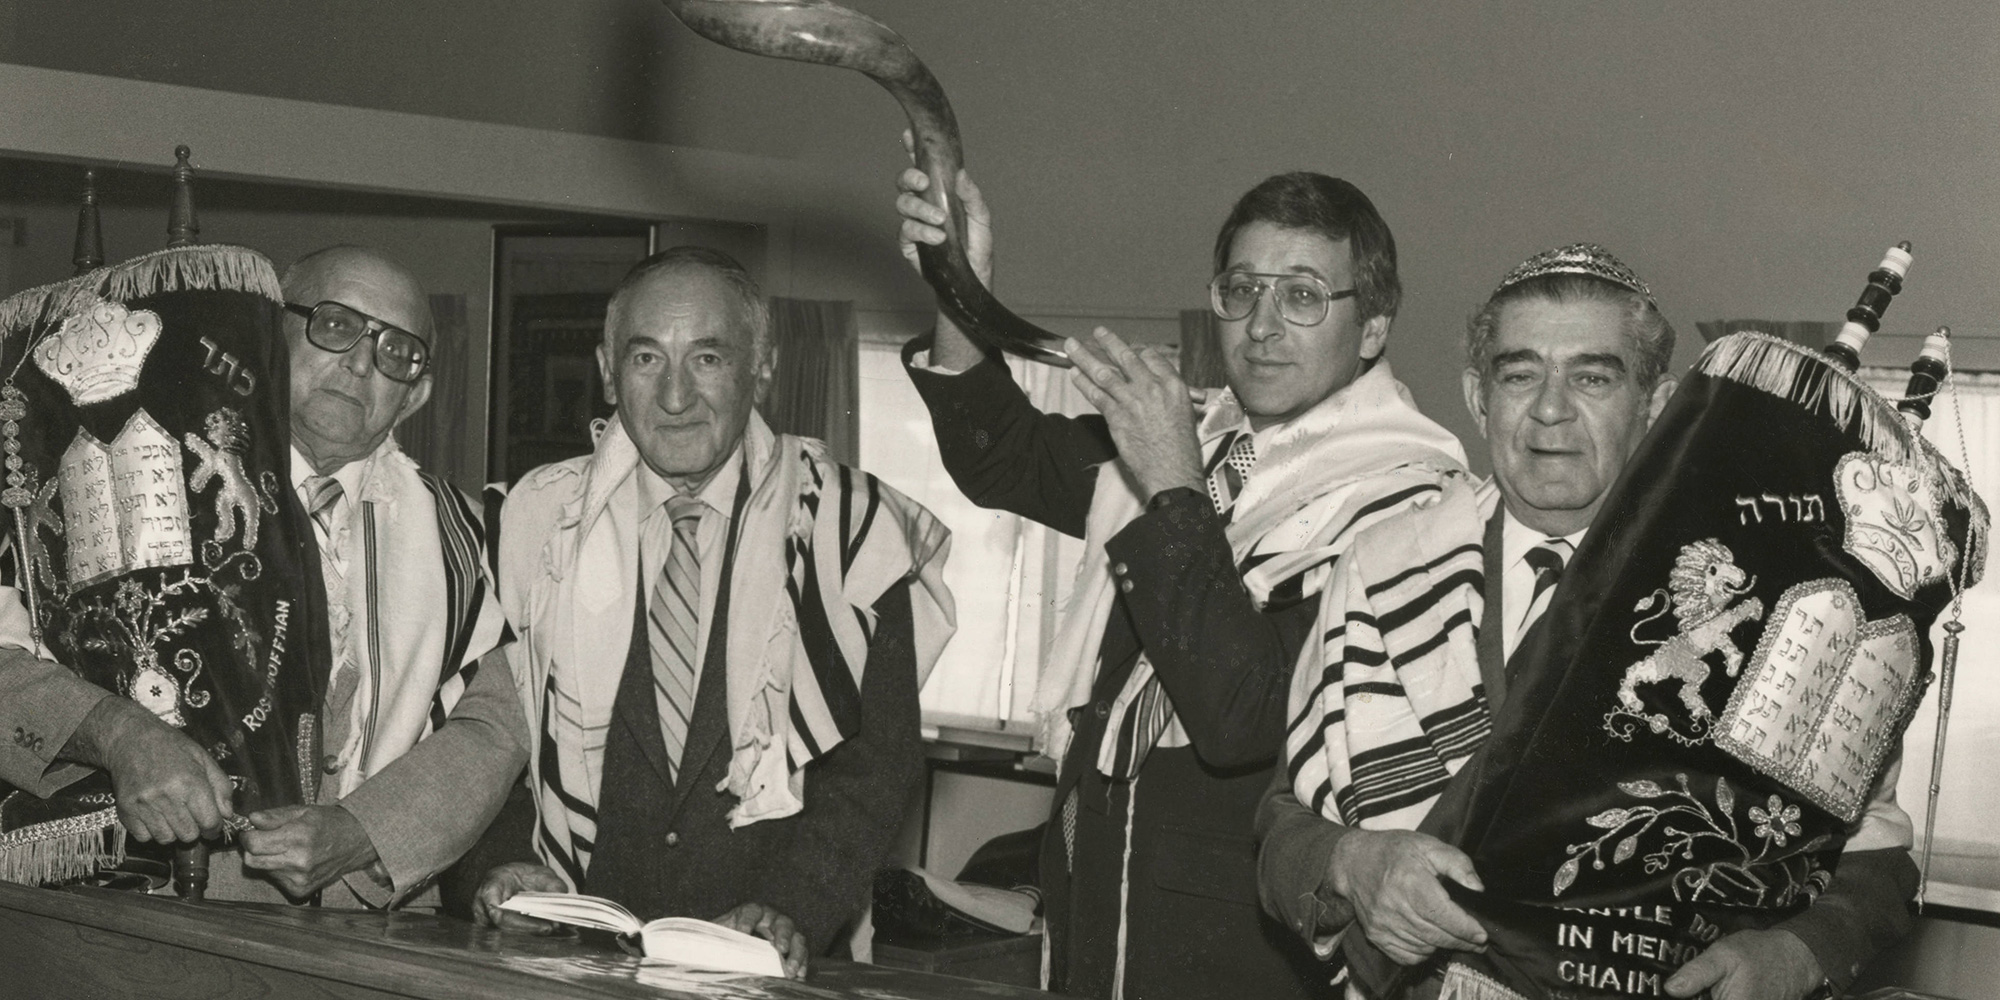 Photograph of men with Torah scrolls and shofar, n.d. Jewish Federation of Las Vegas Records. UNLV Special Collections.